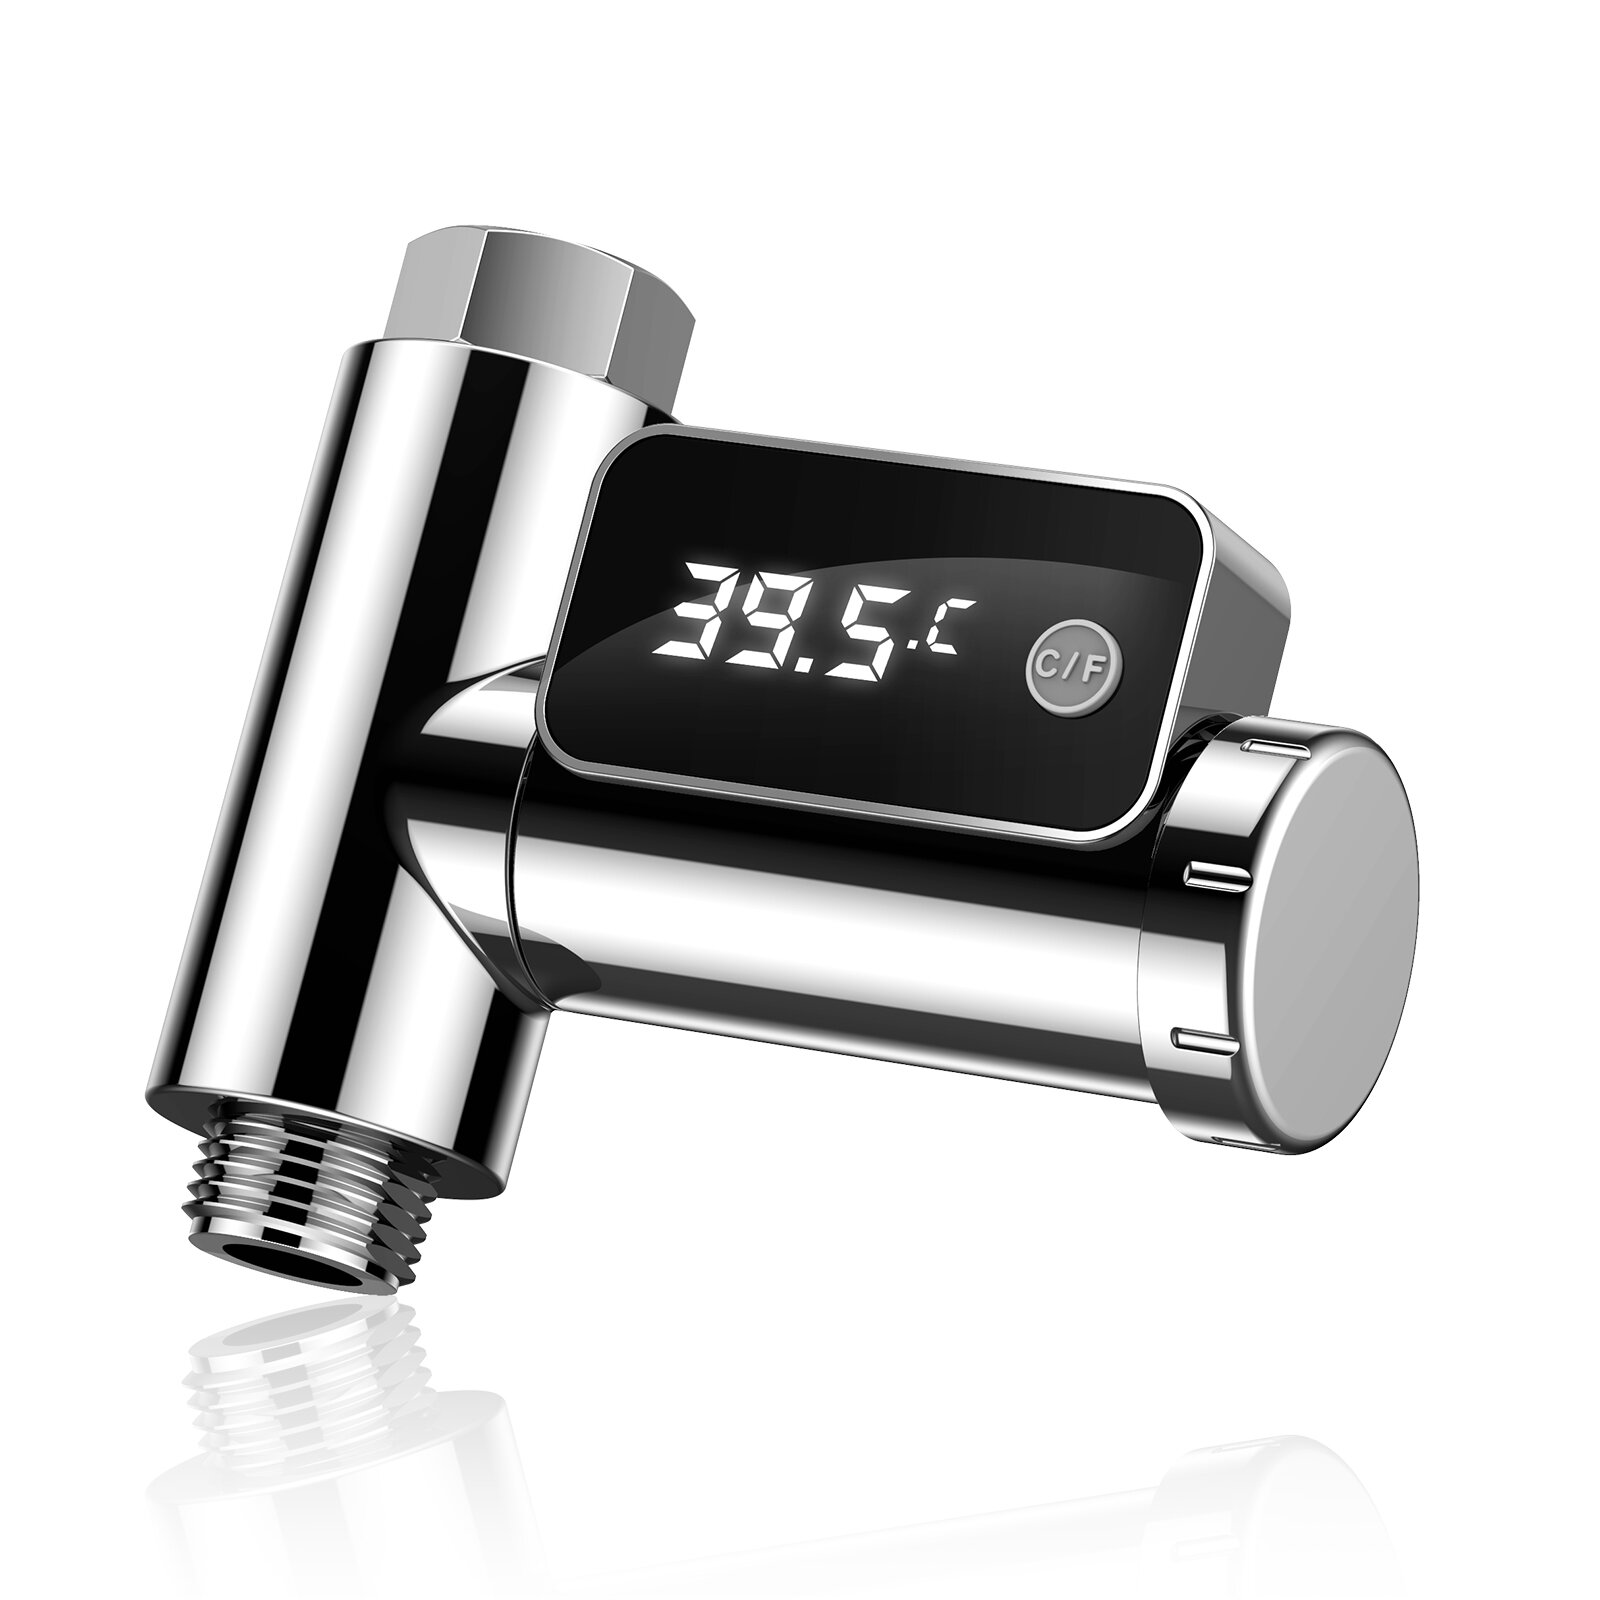 360 ° Rotation LED Faucets Water Thermometer Fahrenheit Celsius Adjustable Bath Creative LED Screen Diaplay Faucet Showe